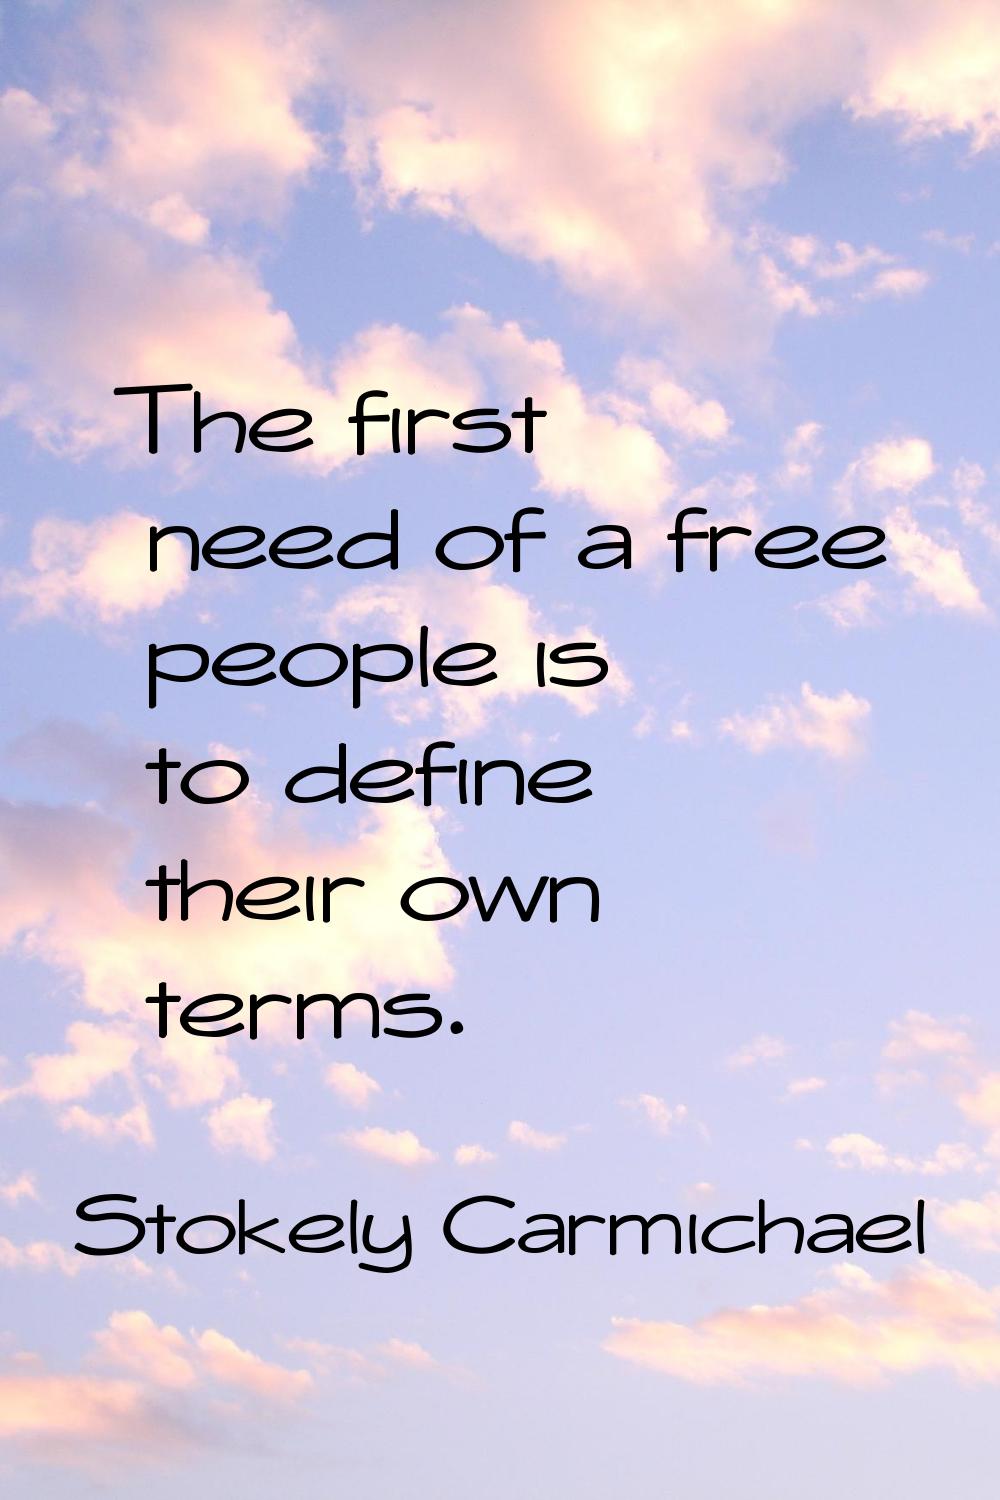 The first need of a free people is to define their own terms.